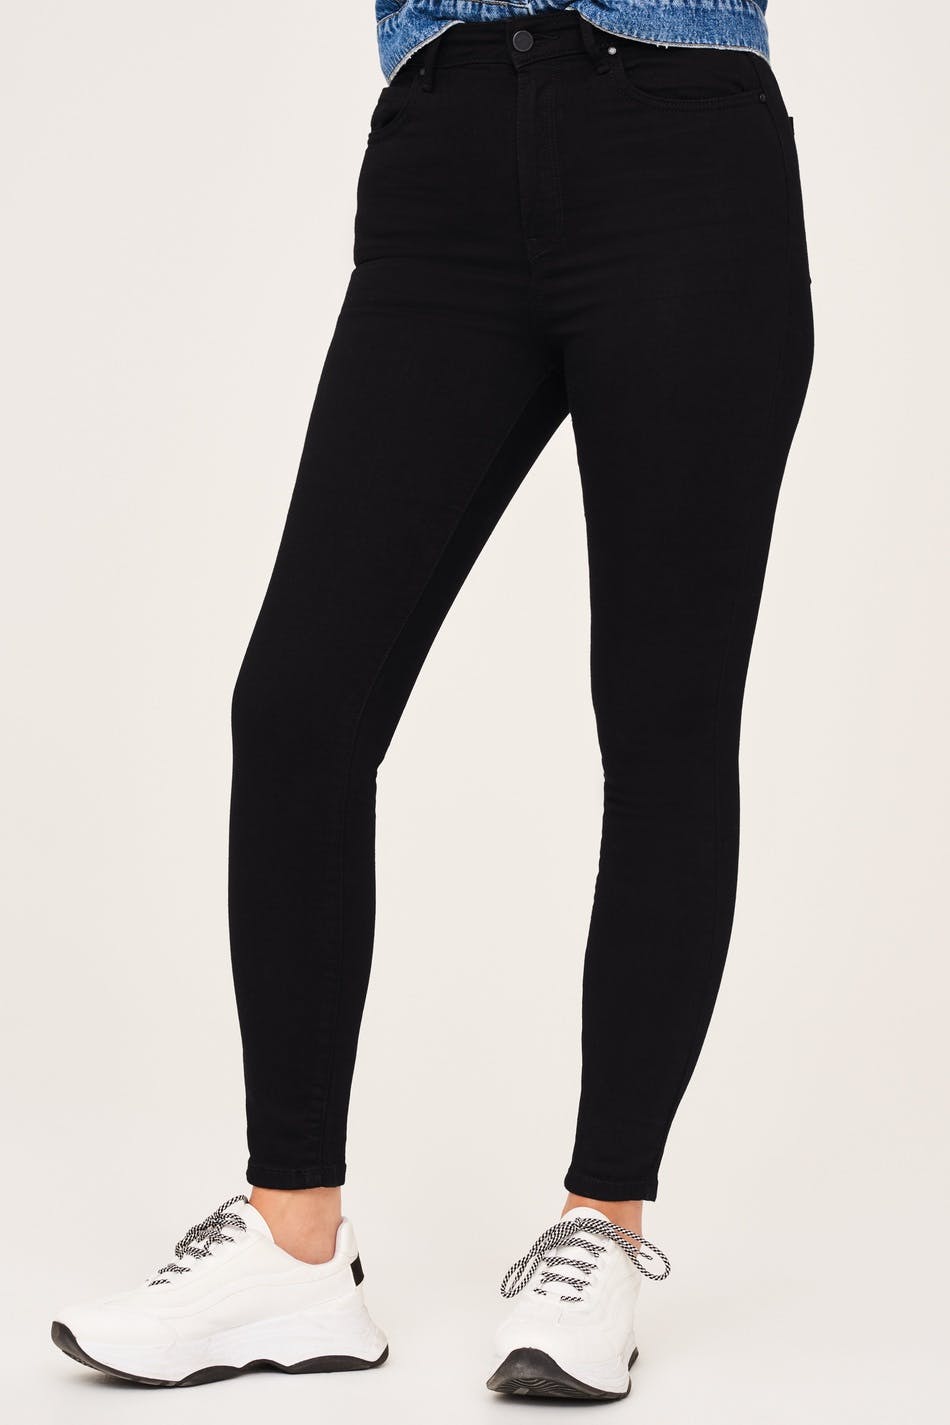 Gina curve jeans - subskinny - Gina Tricot